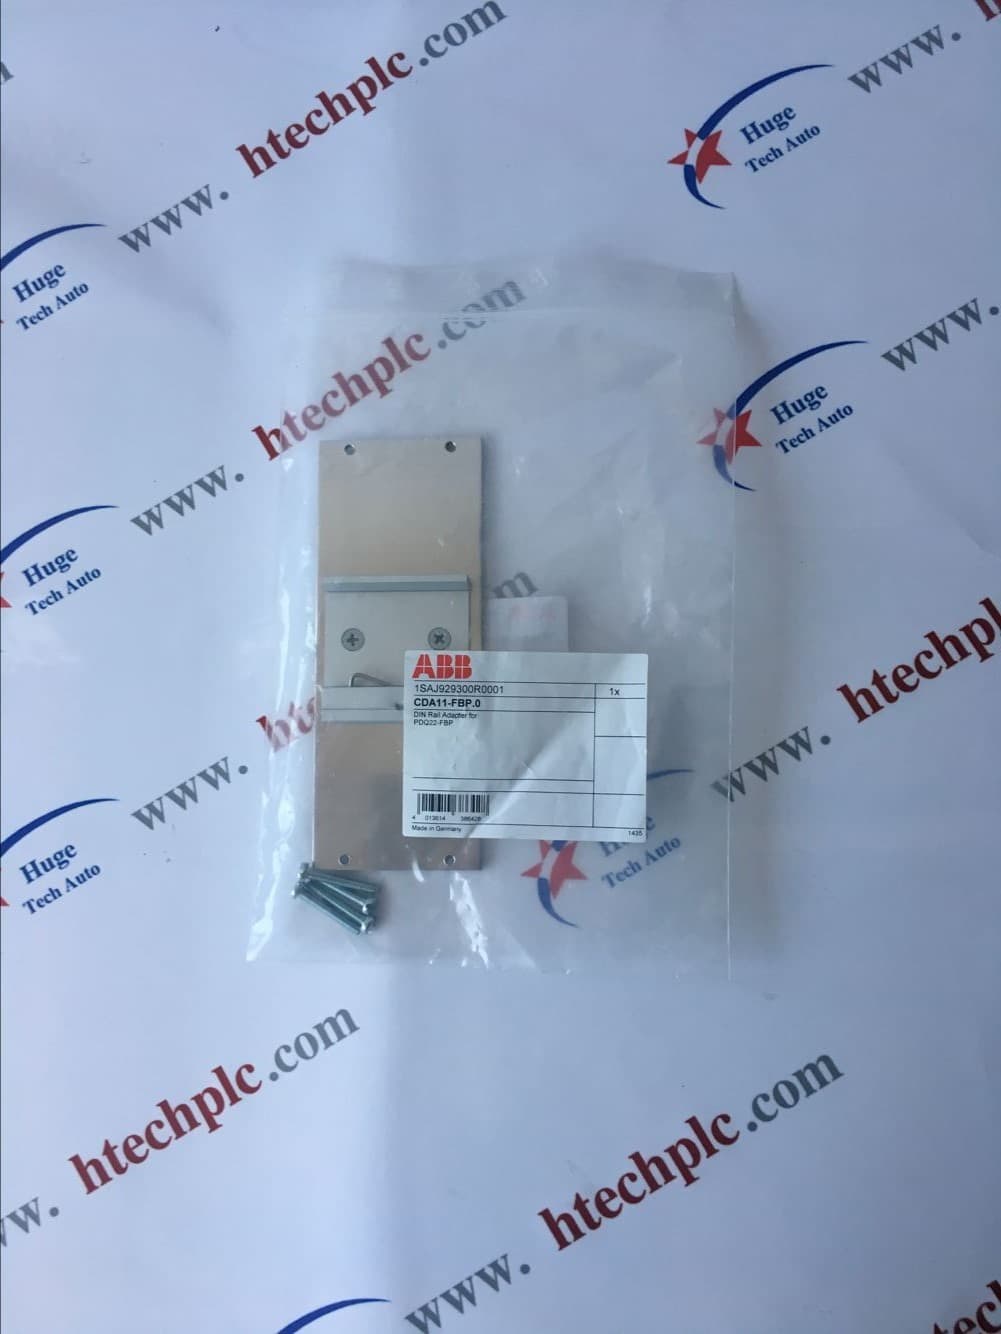 ABB 5STP 27H1860 industrial spare parts with 12 months warra